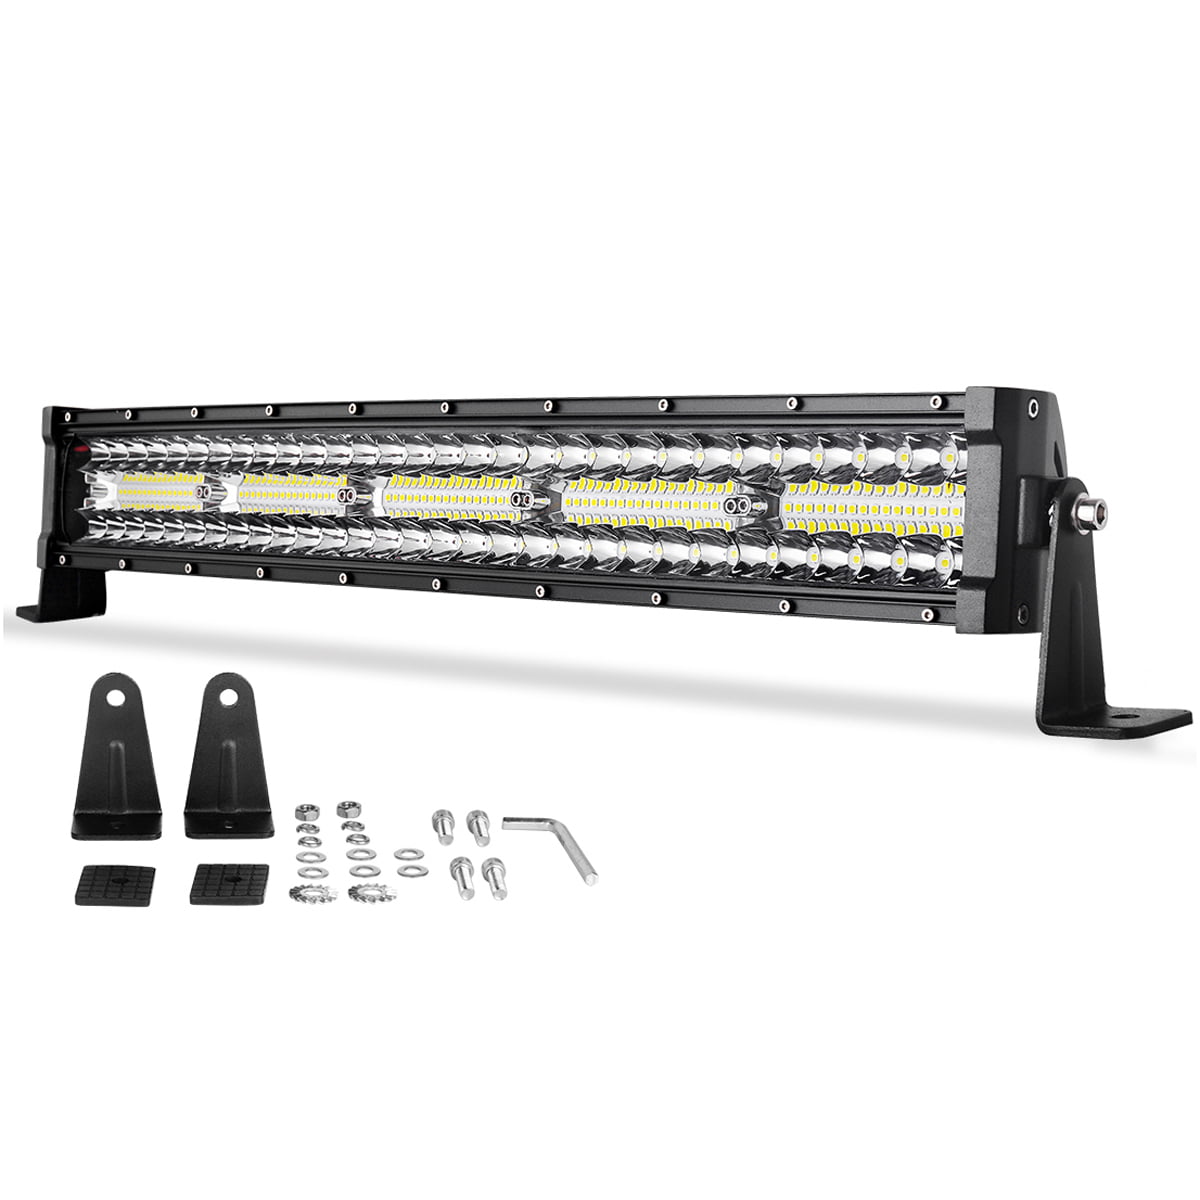 AUTOSAVER88 22 LED Light Bar Triple Row Curved Flood Spot Combo Beam Led Bar 270W Off Road Driving Lights Compatible with Jeep Trucks Boats ATV Jeep 